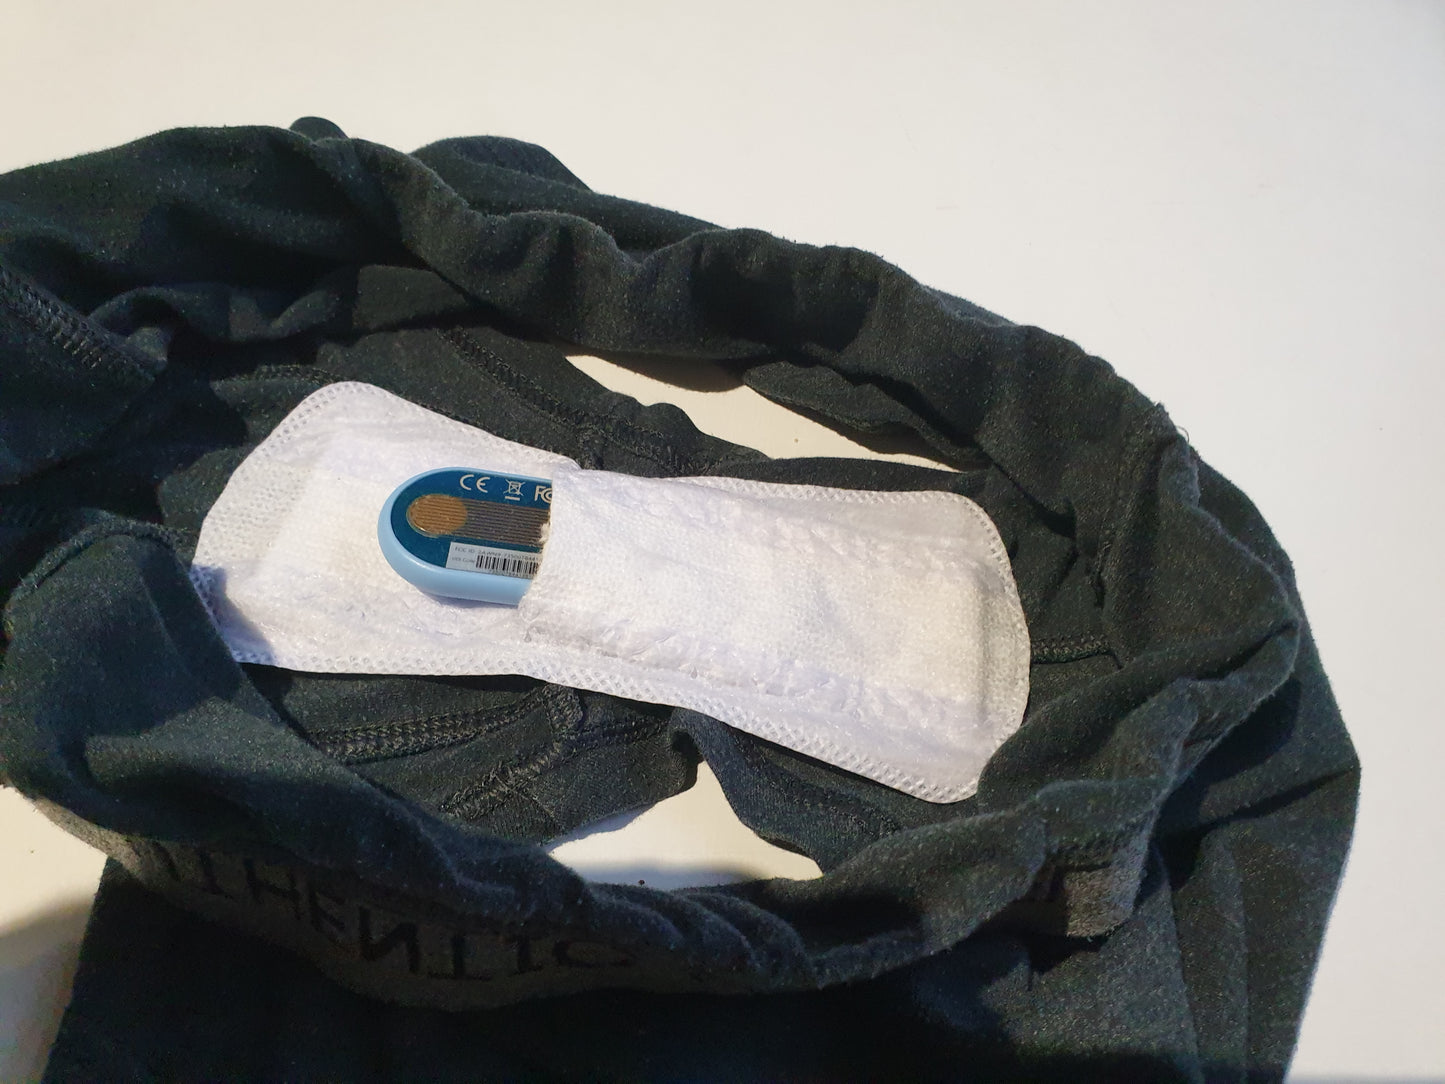 Pjama Bedwetting Connect Sensor put in your own underwear for bedwetting treatment